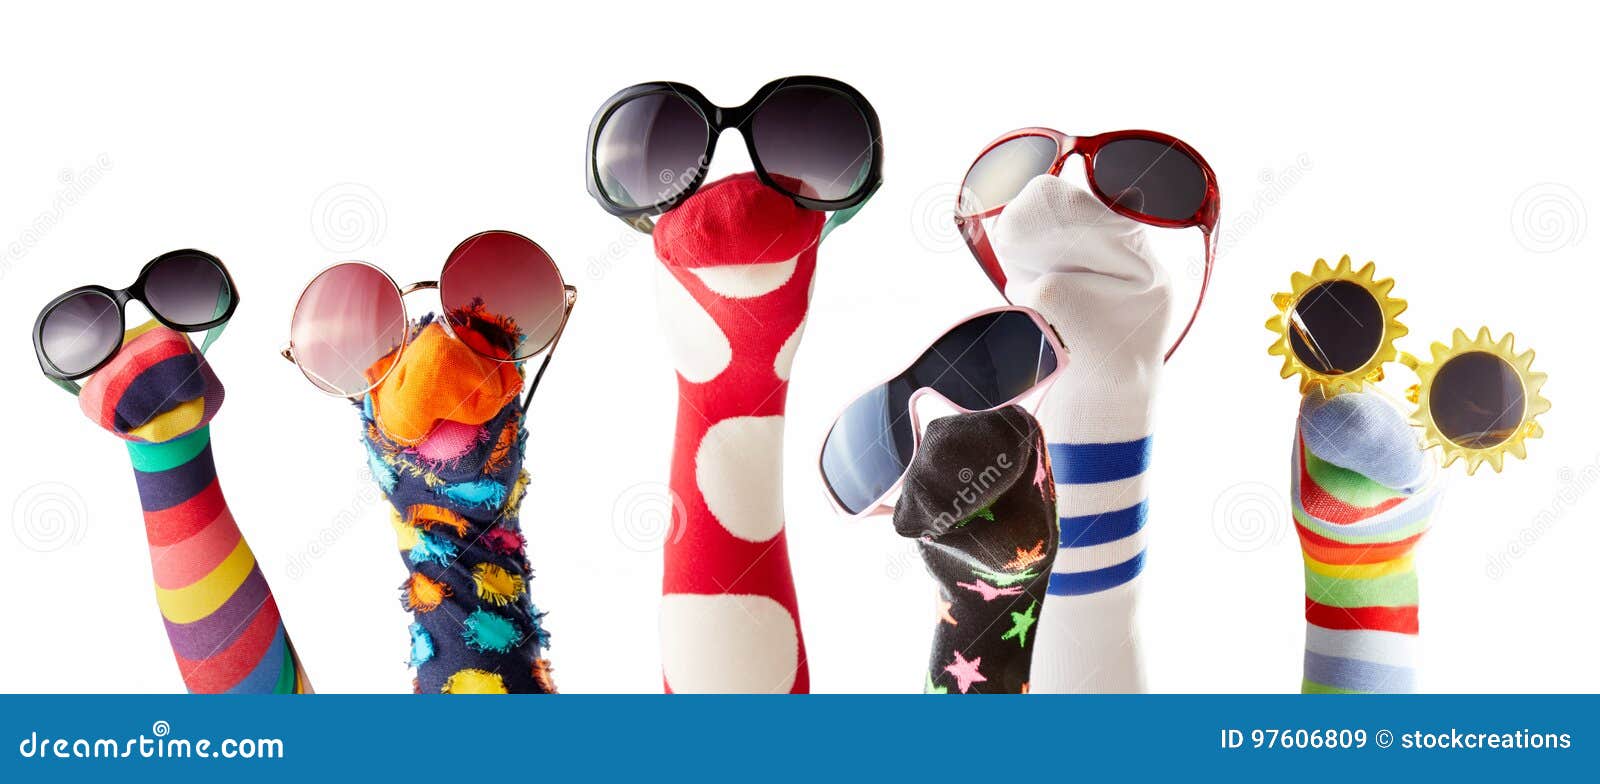 sock puppets with glasses against white background